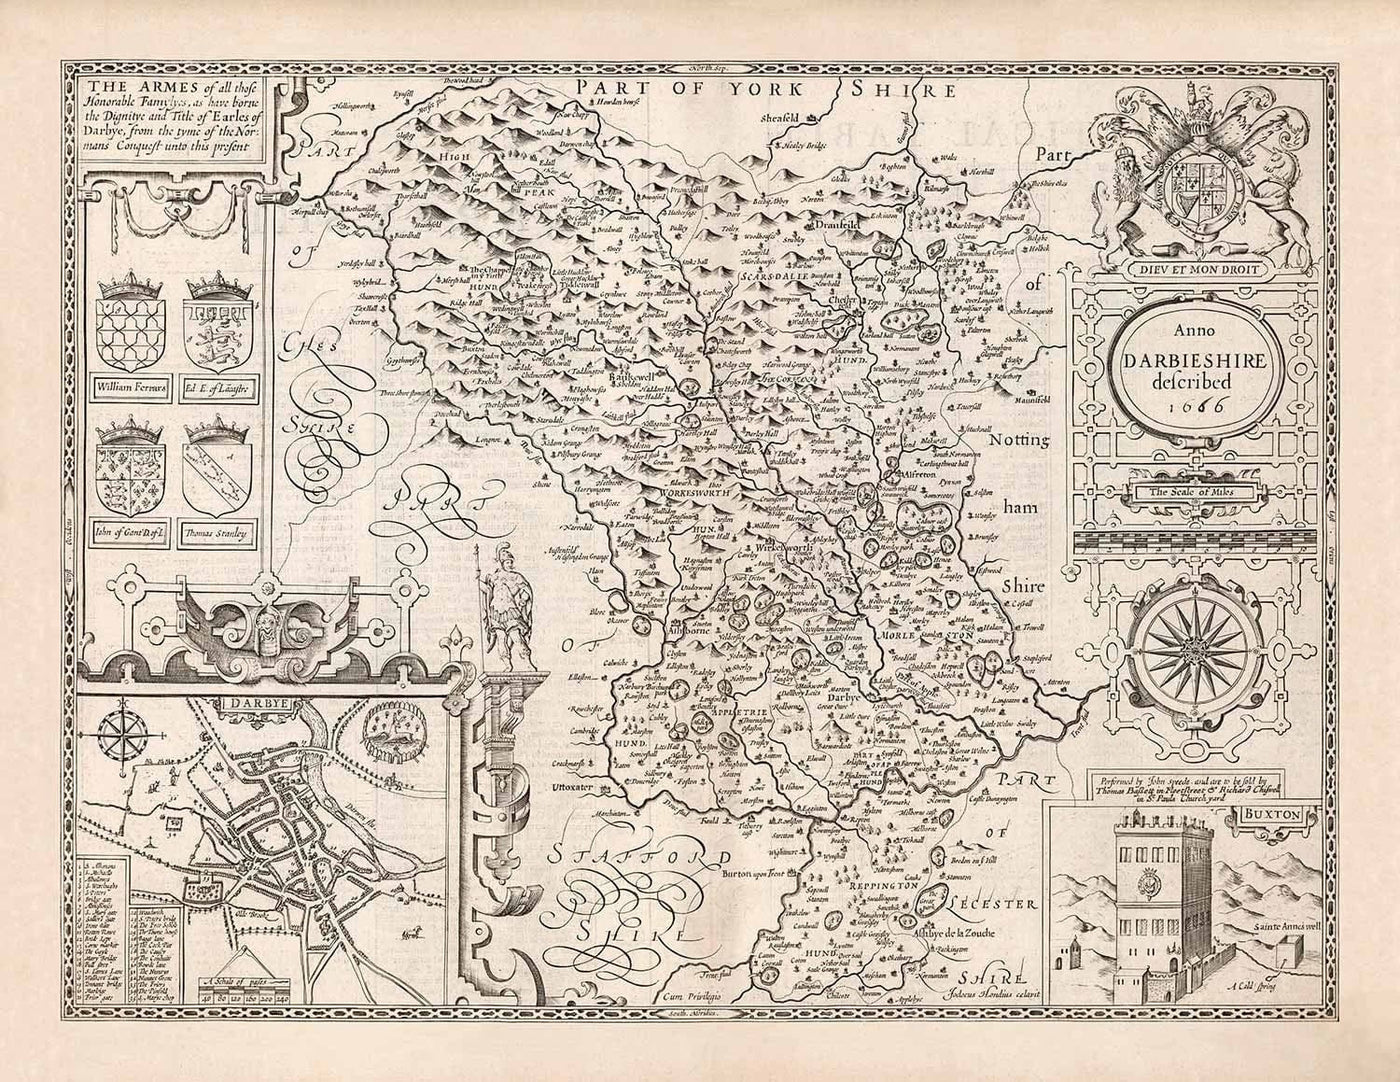 Old Monochrome Map of Derbyshire, 1611 by John Speed - Derby, Chesterfield, Buxton, Peak District